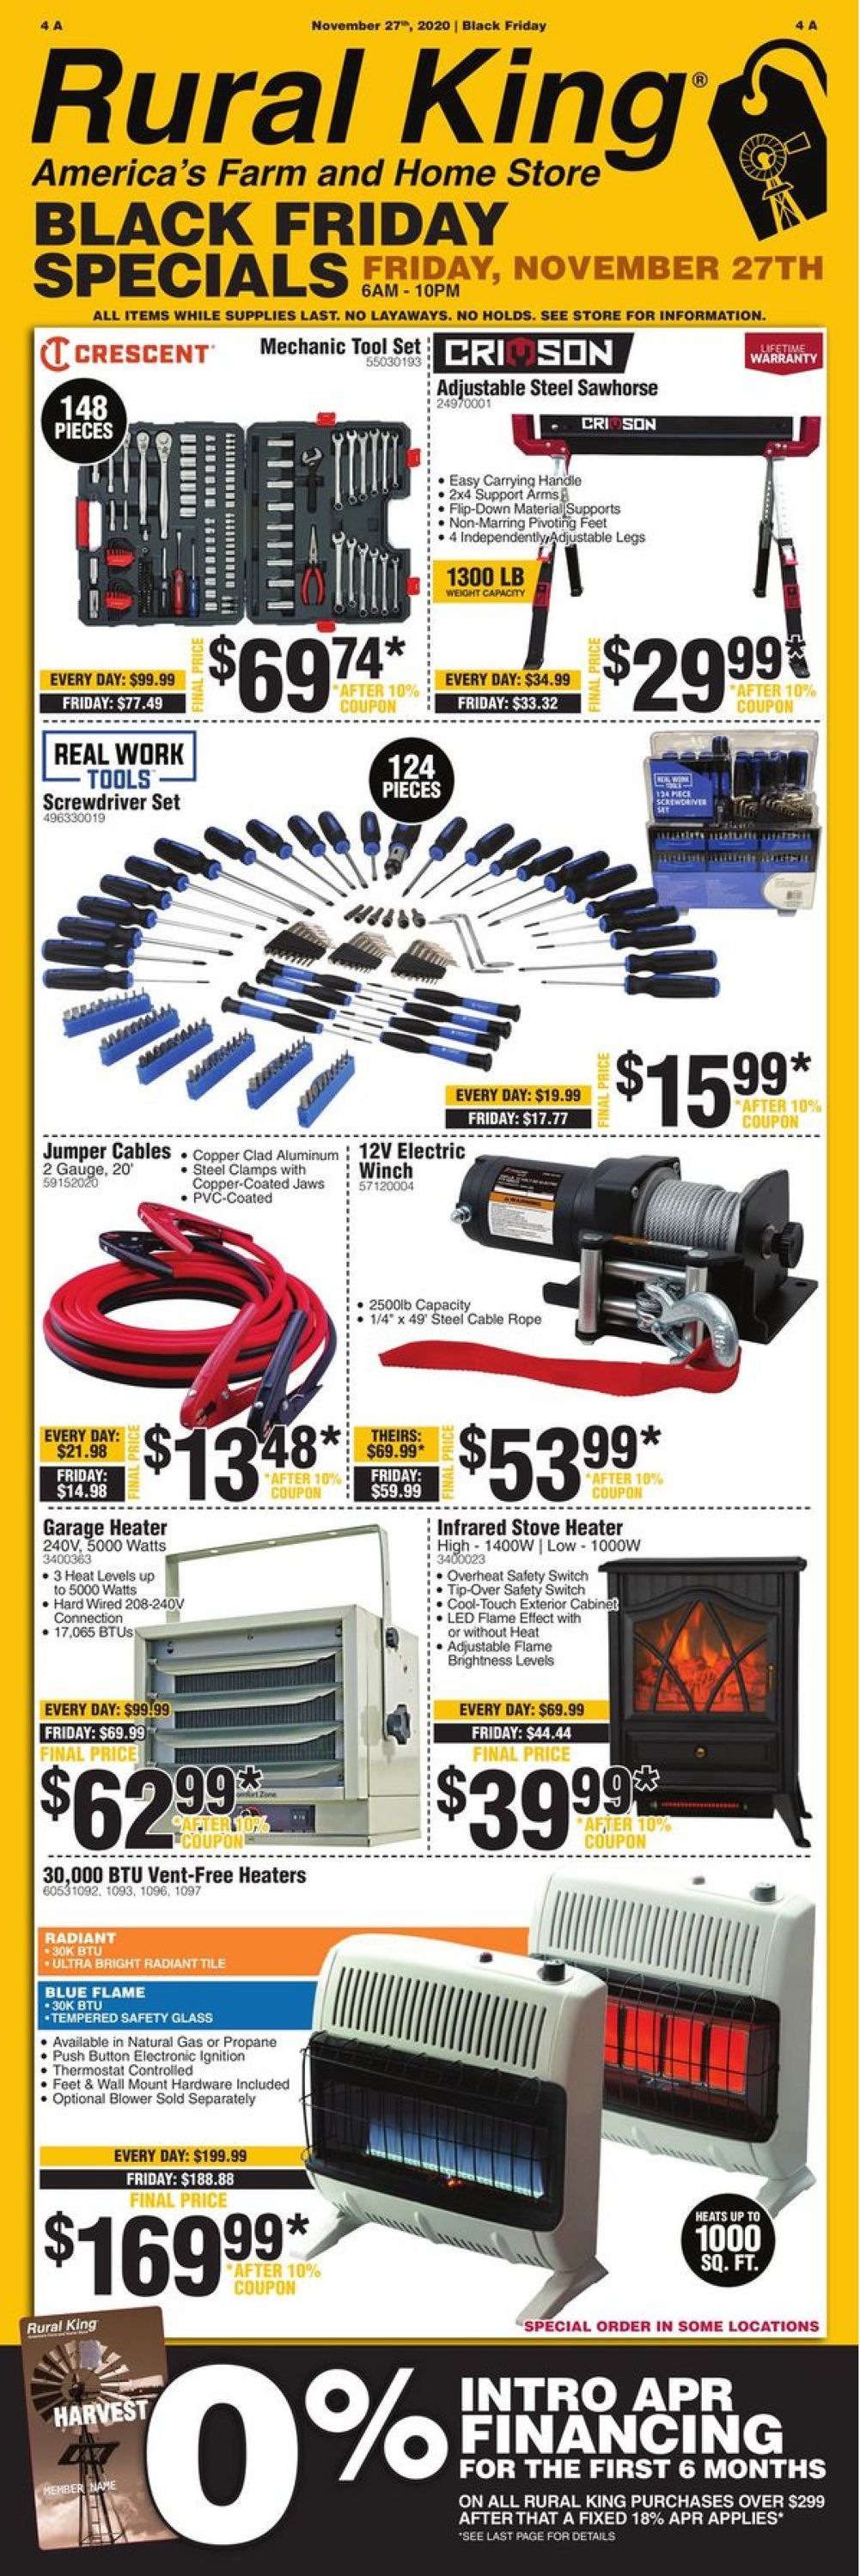 Rural King Thanksgiving 2020 Current weekly ad 11/26 - 11/27/2020 [4 ...
